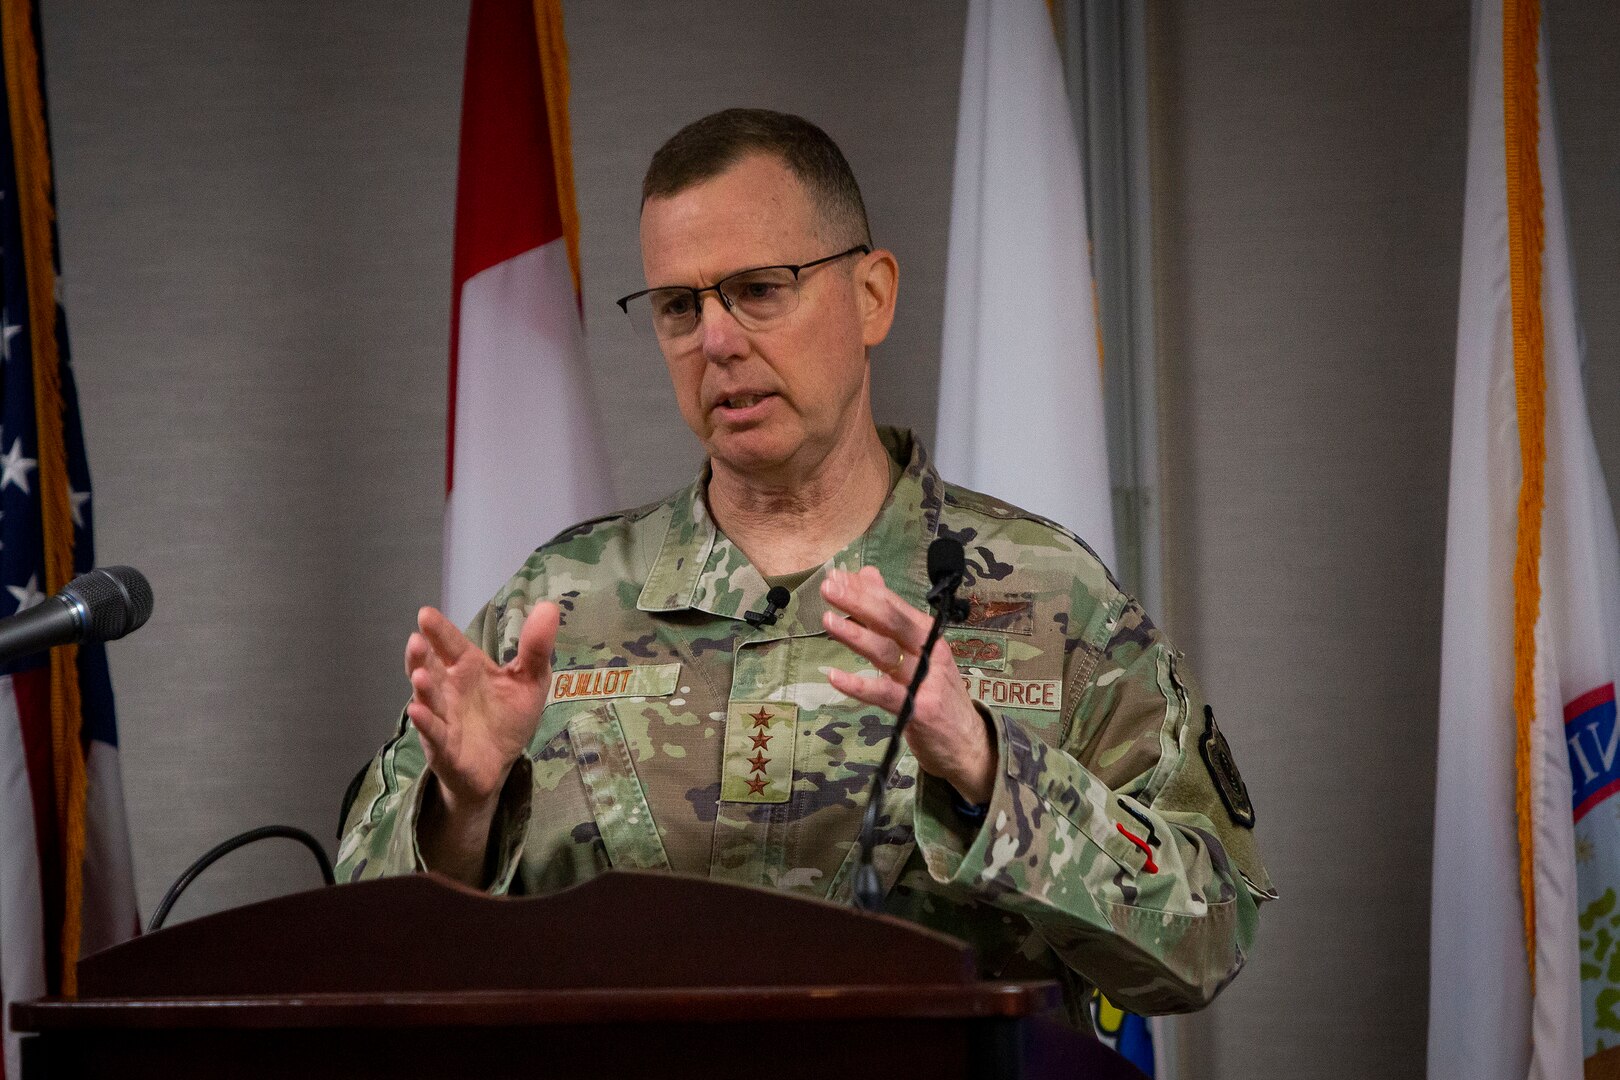 A man in camouflage stands at a lectern with his hands at chest level.